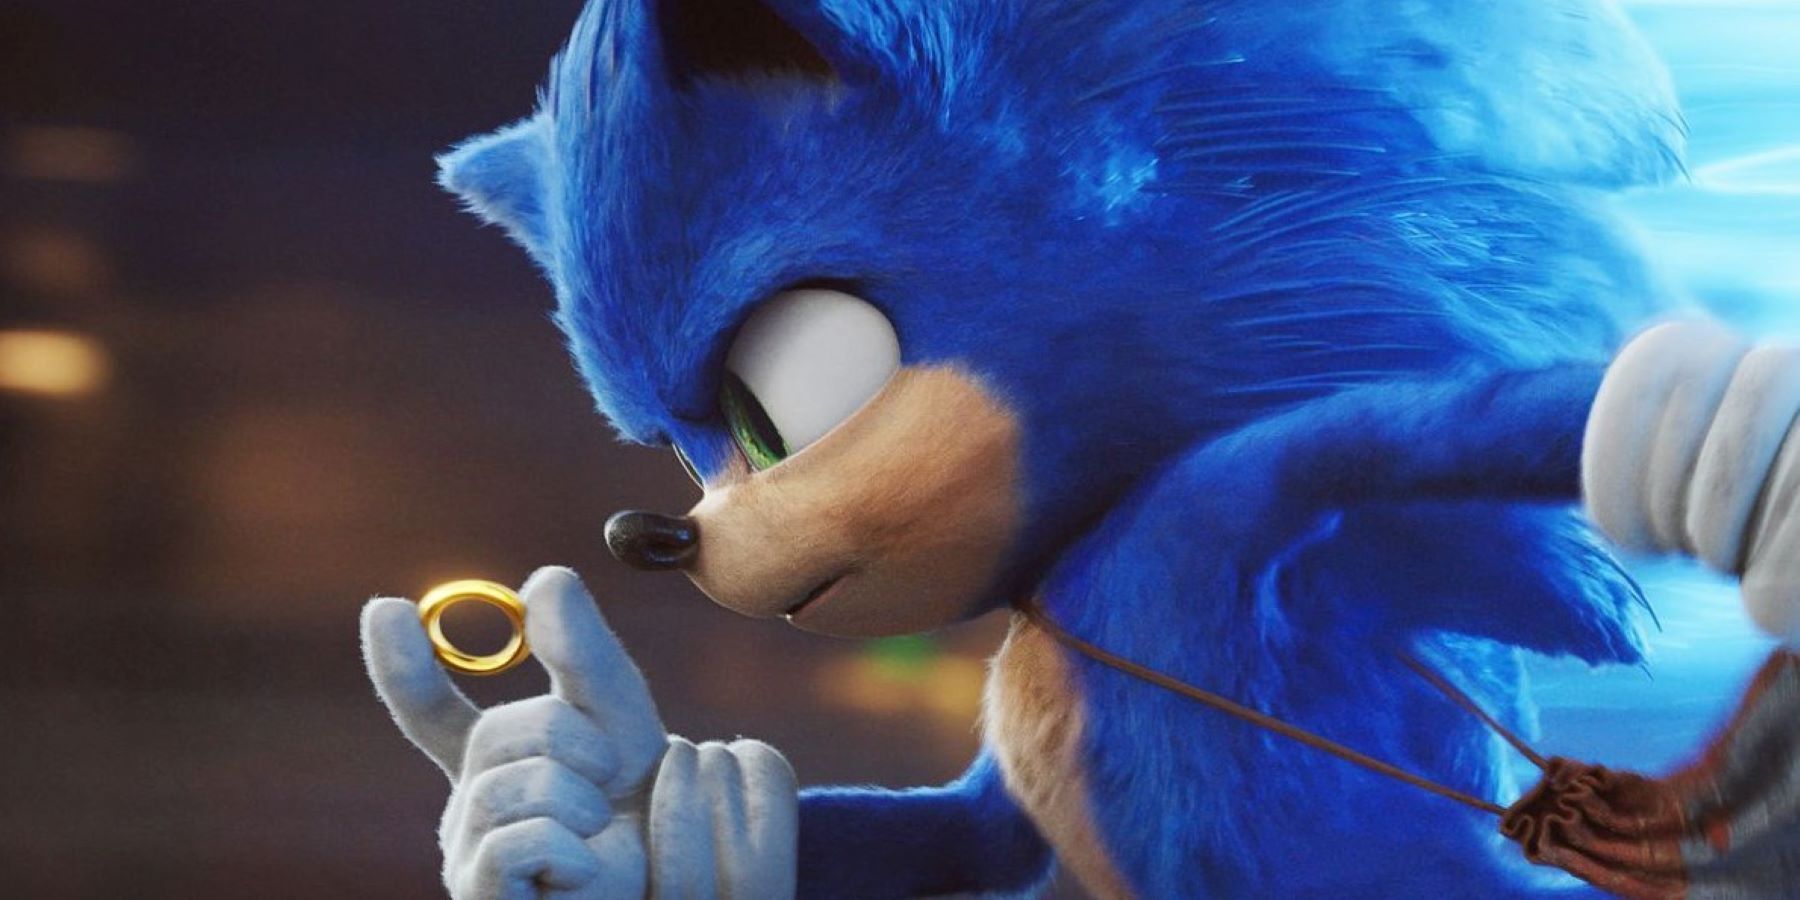 Sonic running and holding a ring in the Sonic the Hedgehog movie